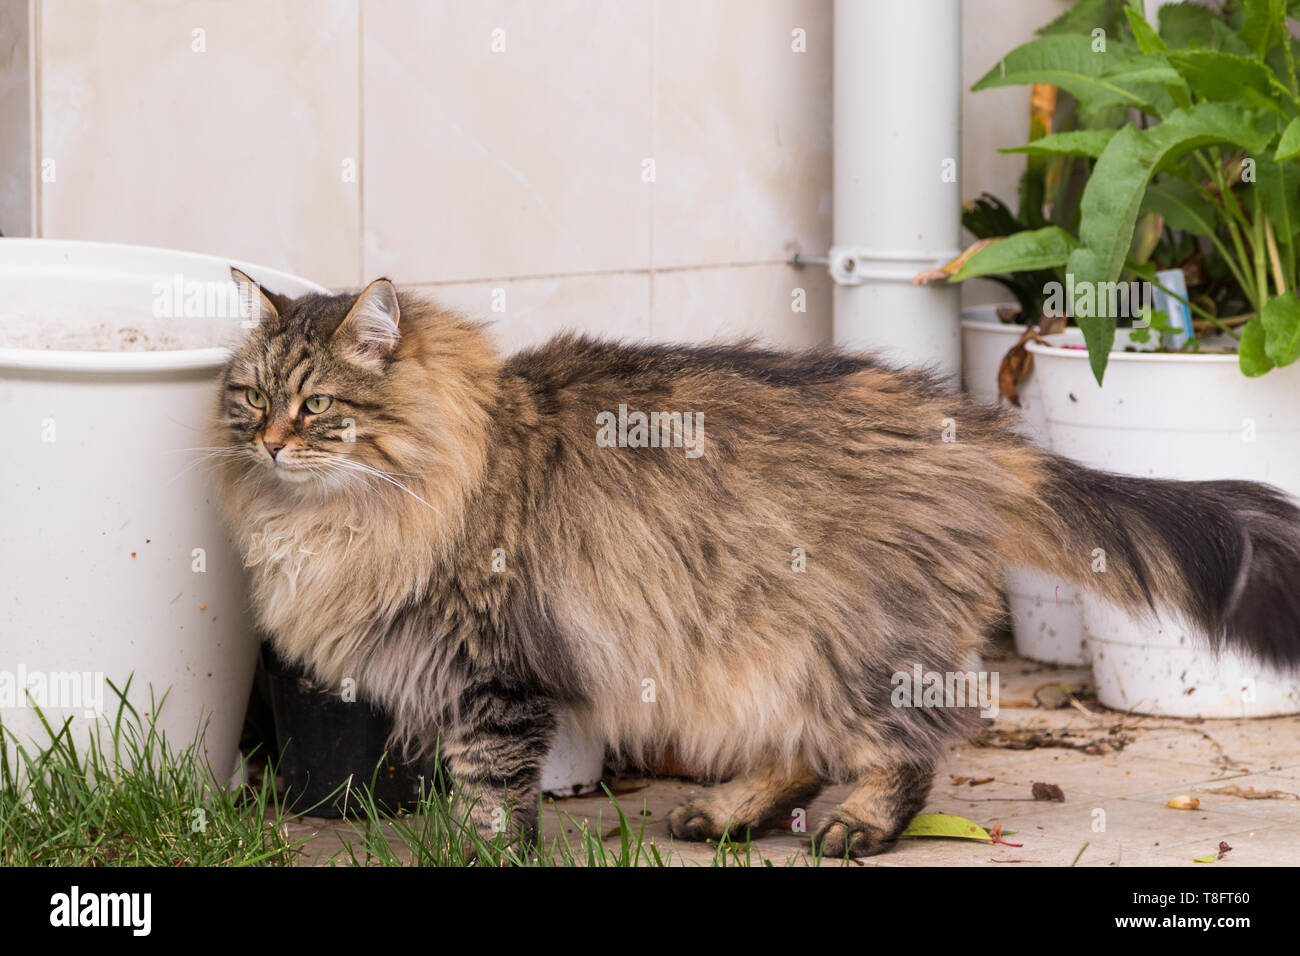 Tabby cat with long hair outdoor in a garden, siberian purebred kitten  Stock Photo - Alamy